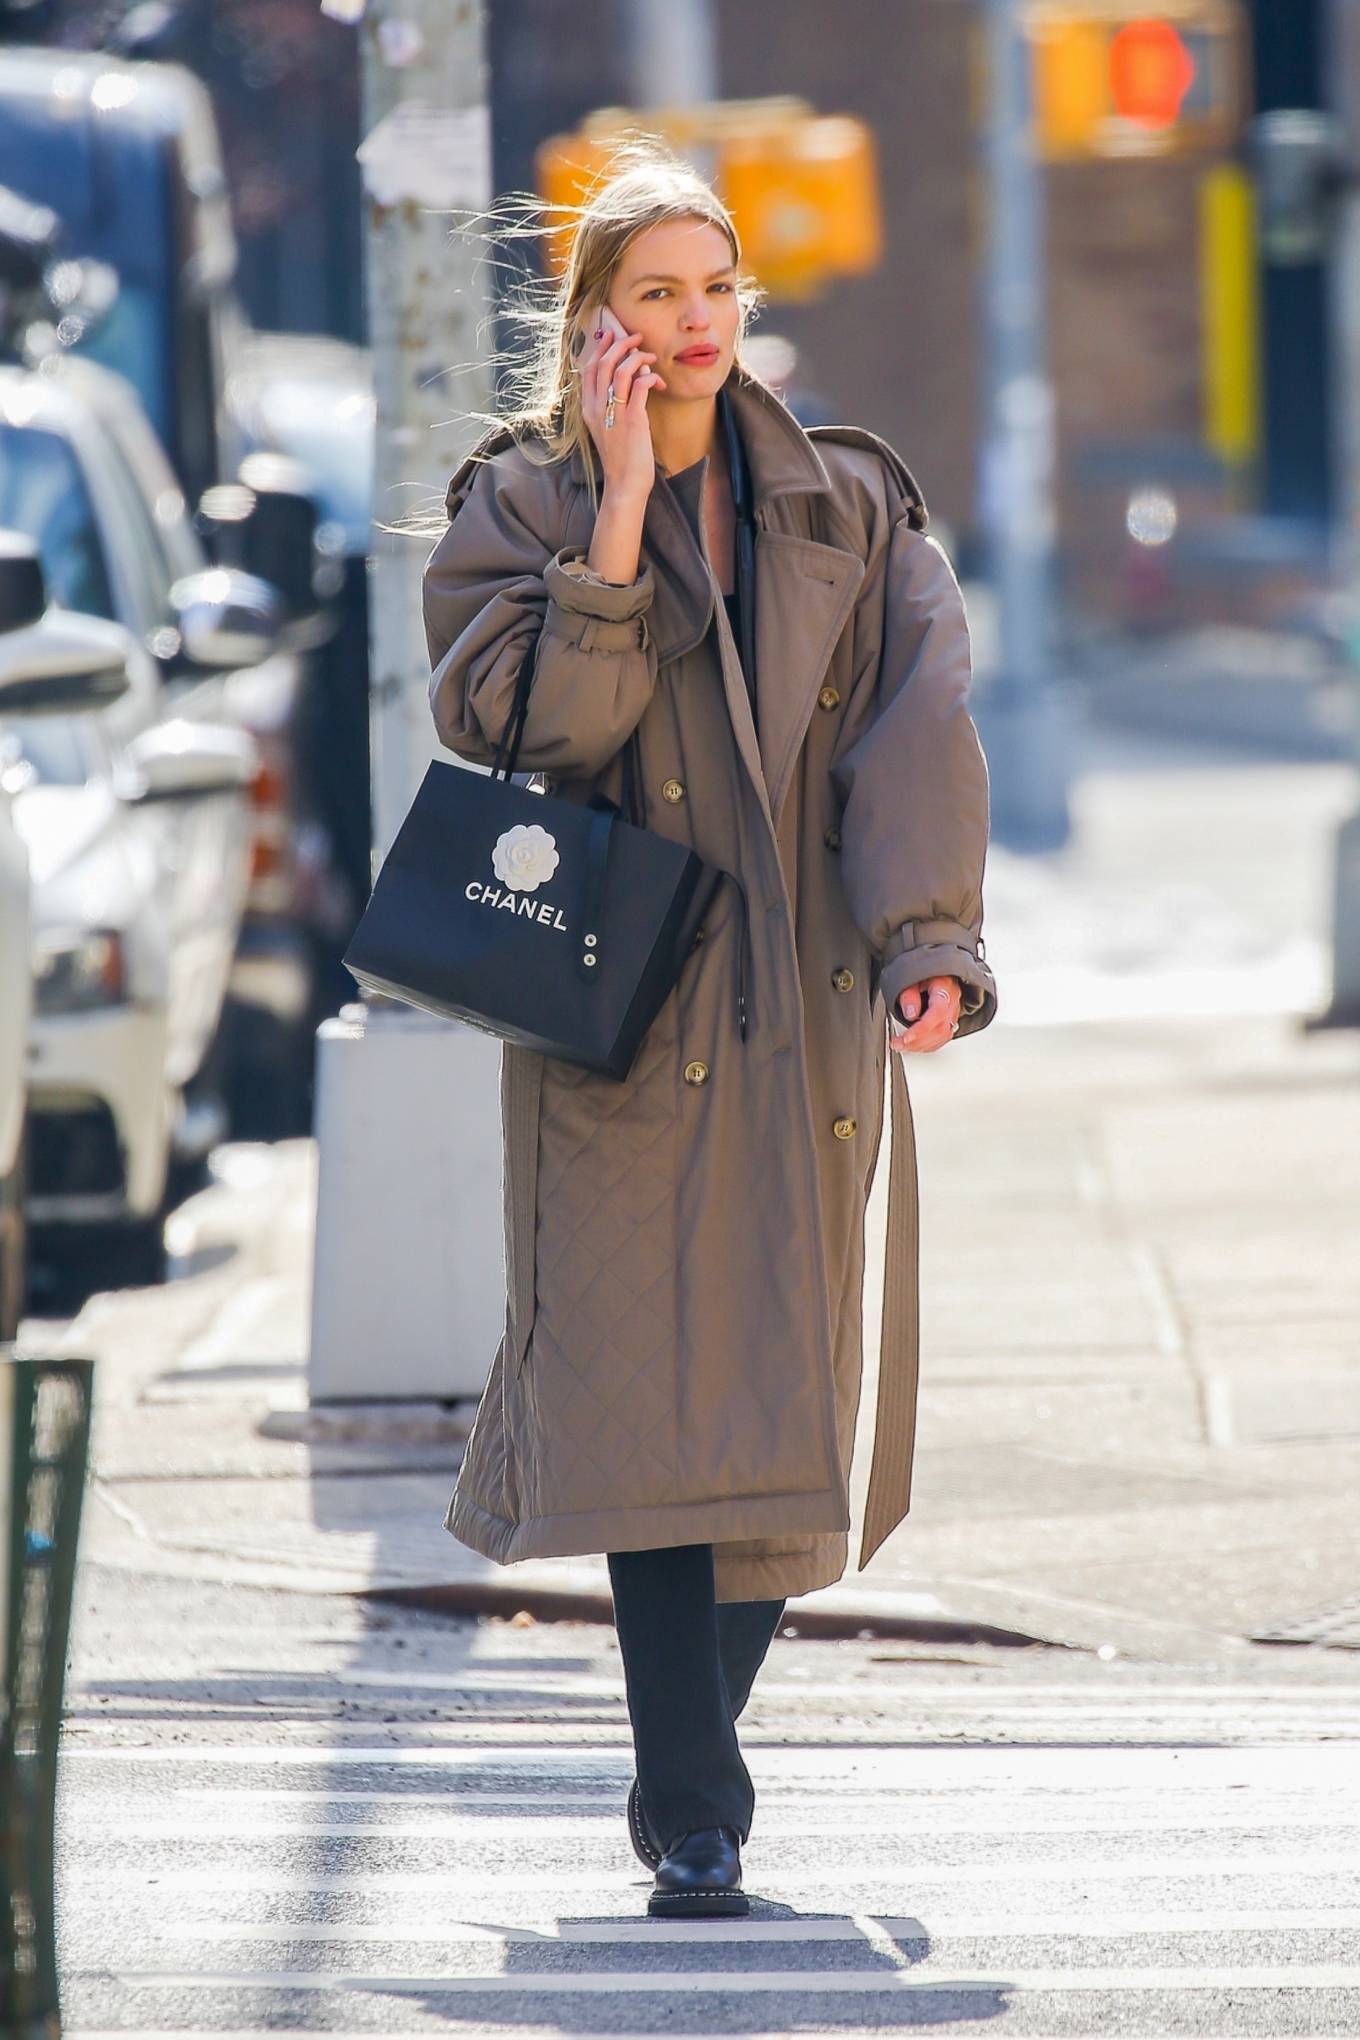 Stella Maxwell 2022 : Stella Maxwell – Dons a trench coat during a shopping trip on 5th Ave in New York-09